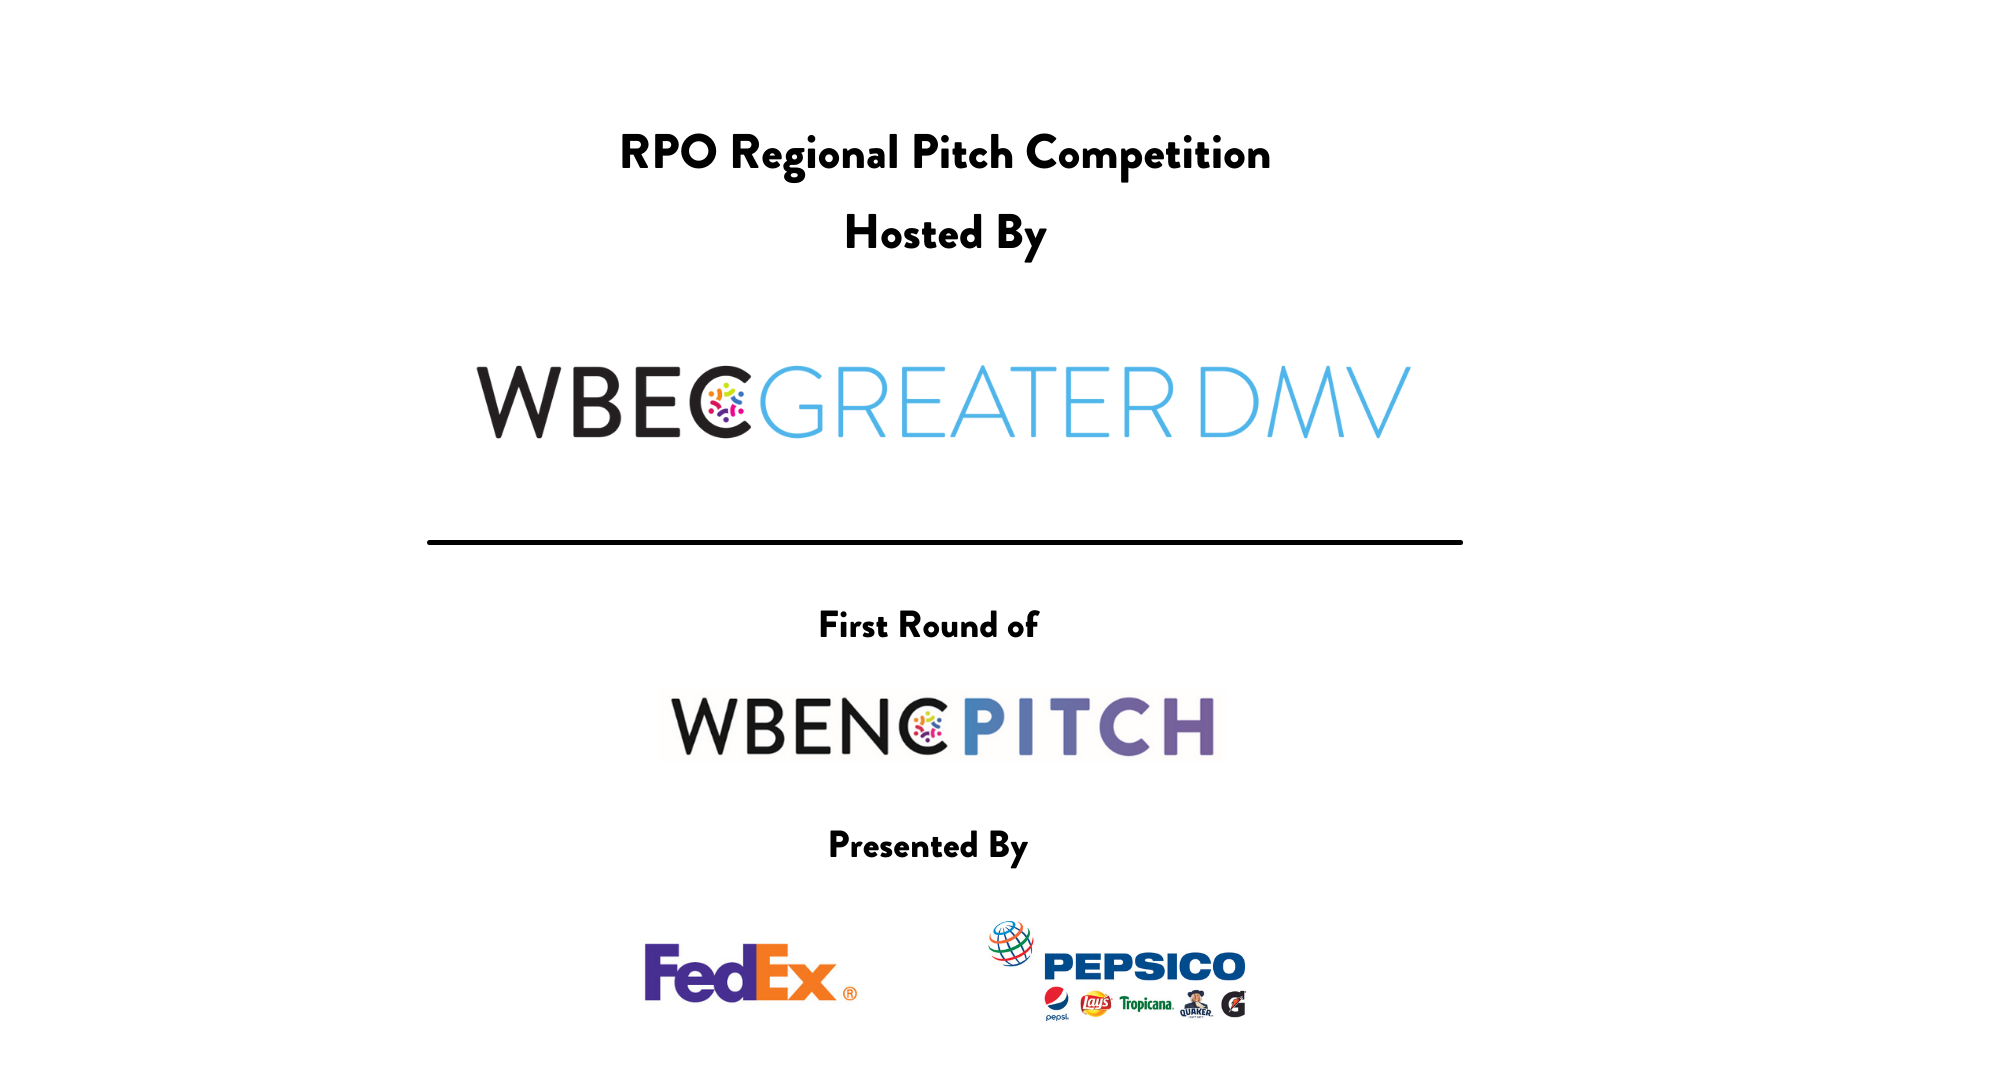 WBEC Greater DMV Pitch Competition